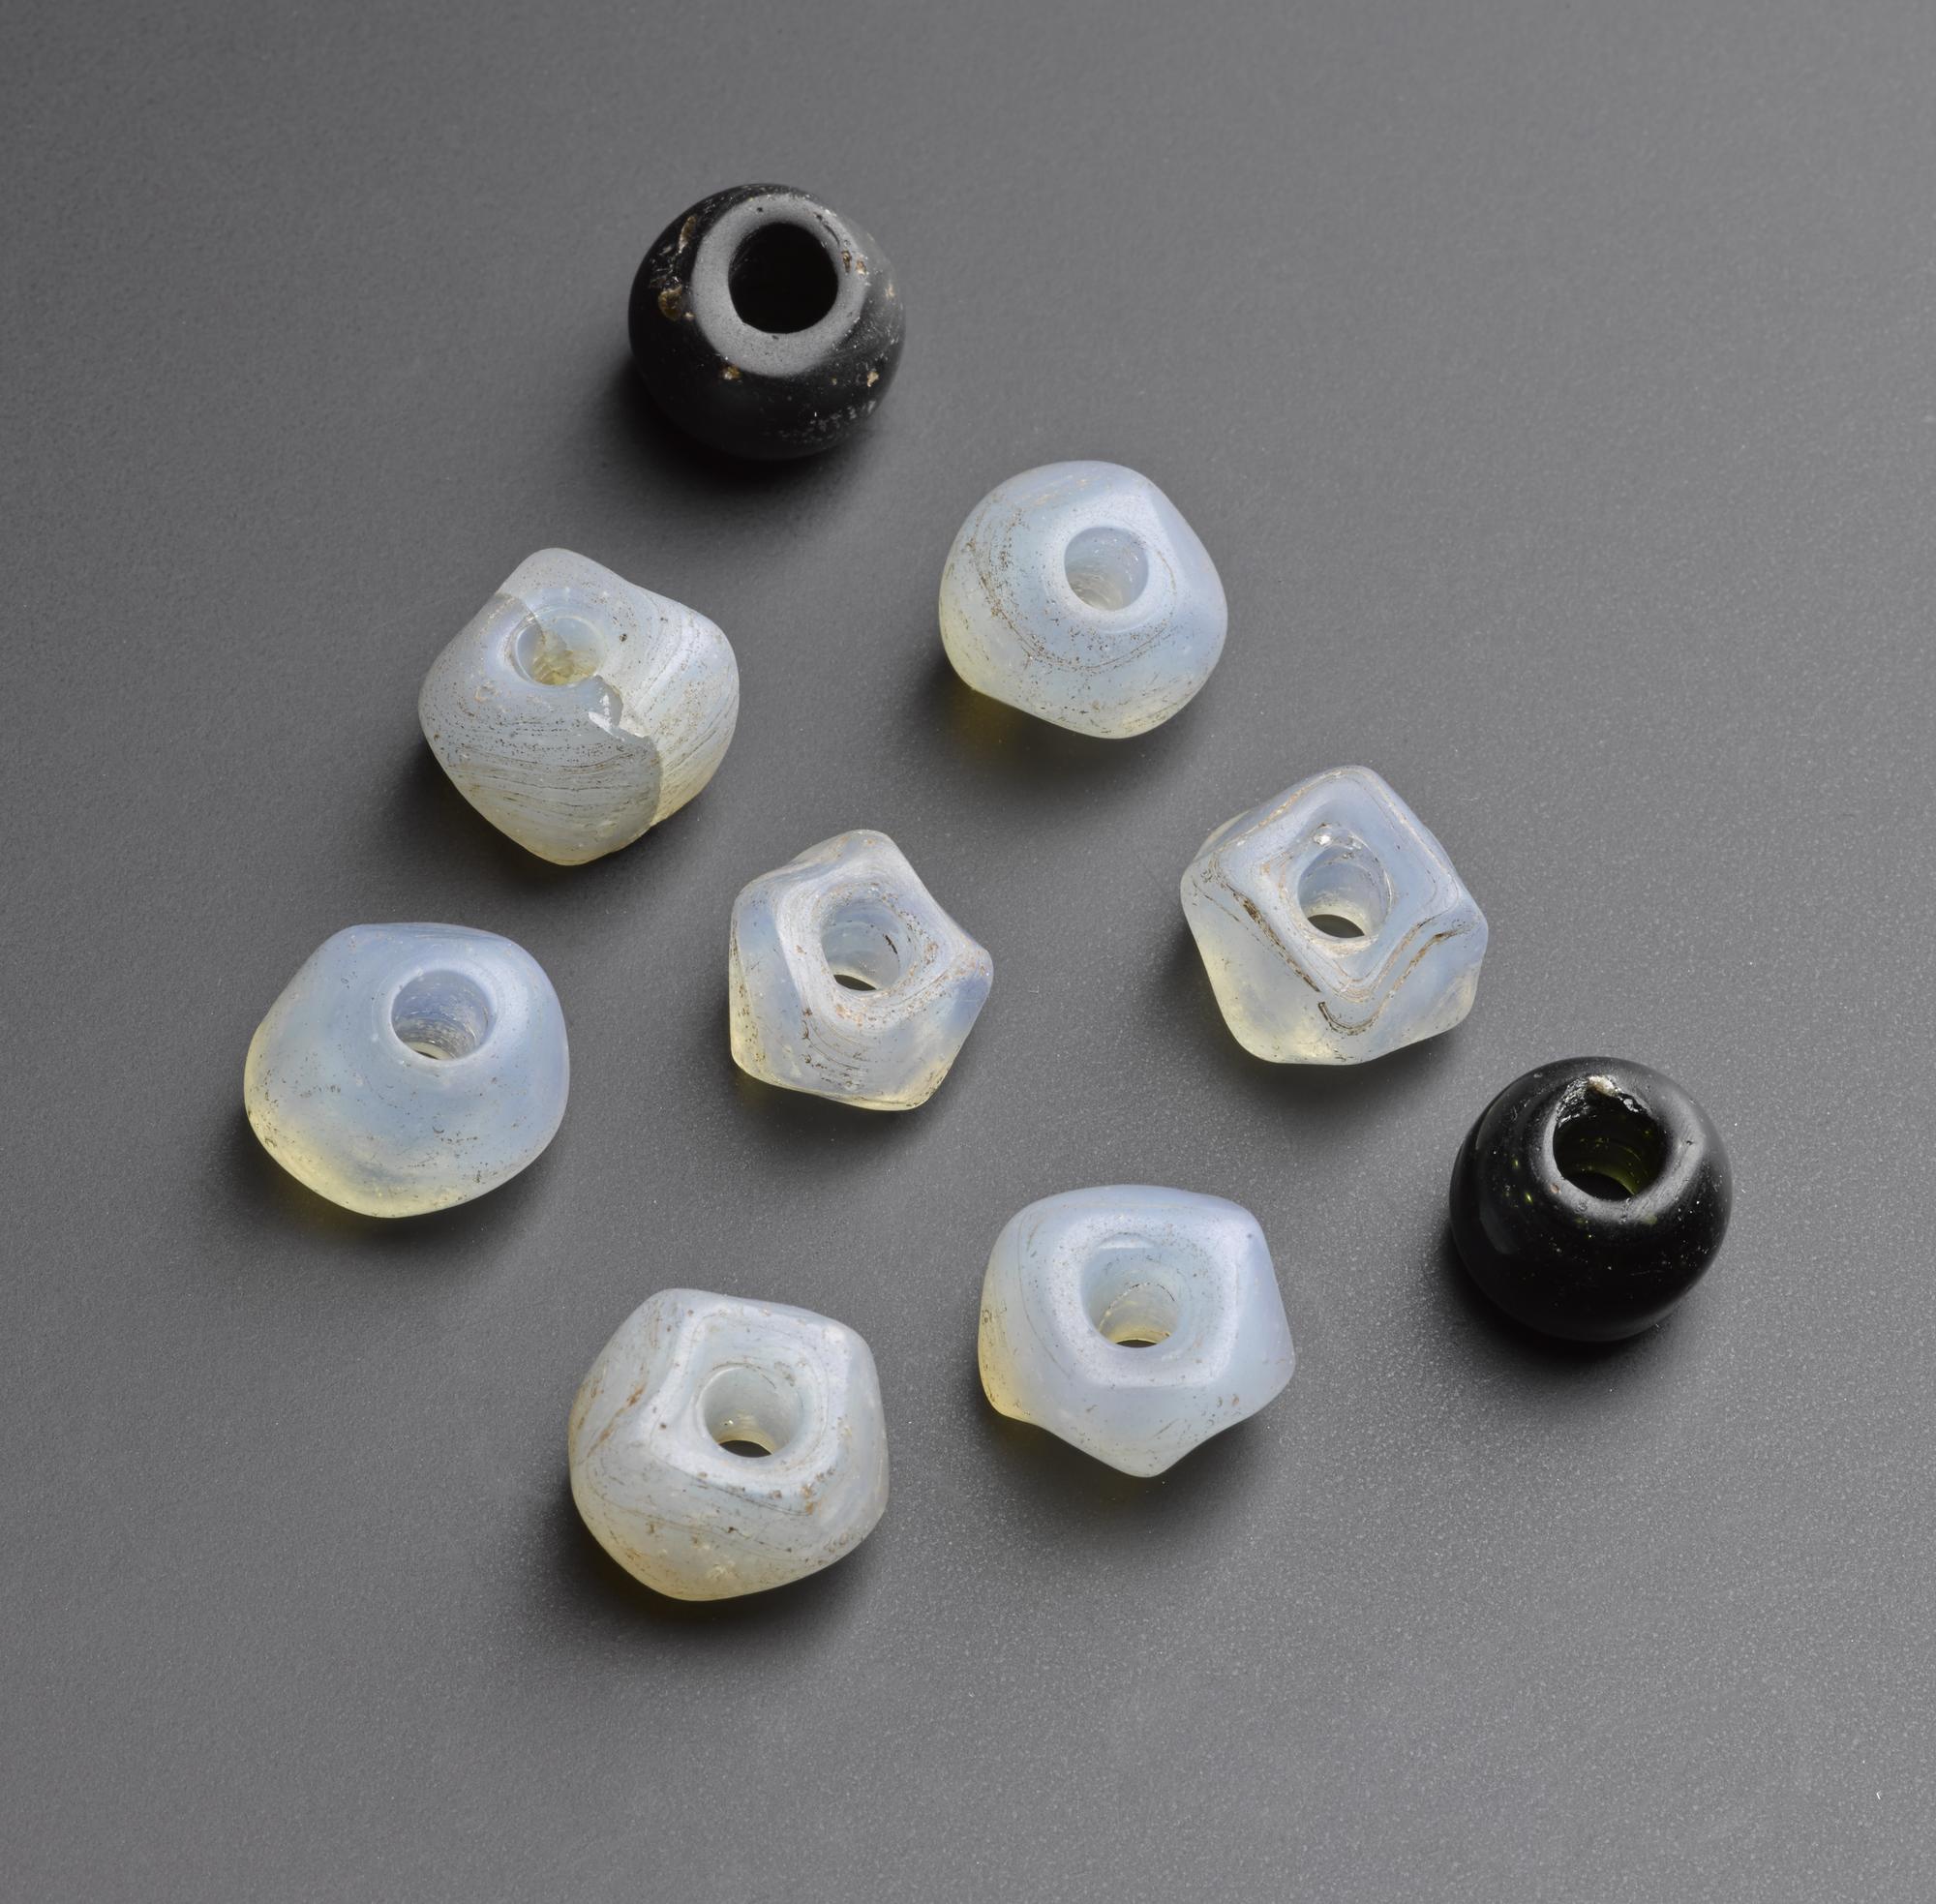 Image of Seven opalescent faced beads and two black oval beads of post-medieval date, from Morham, East Lothian © National Museums Scotland